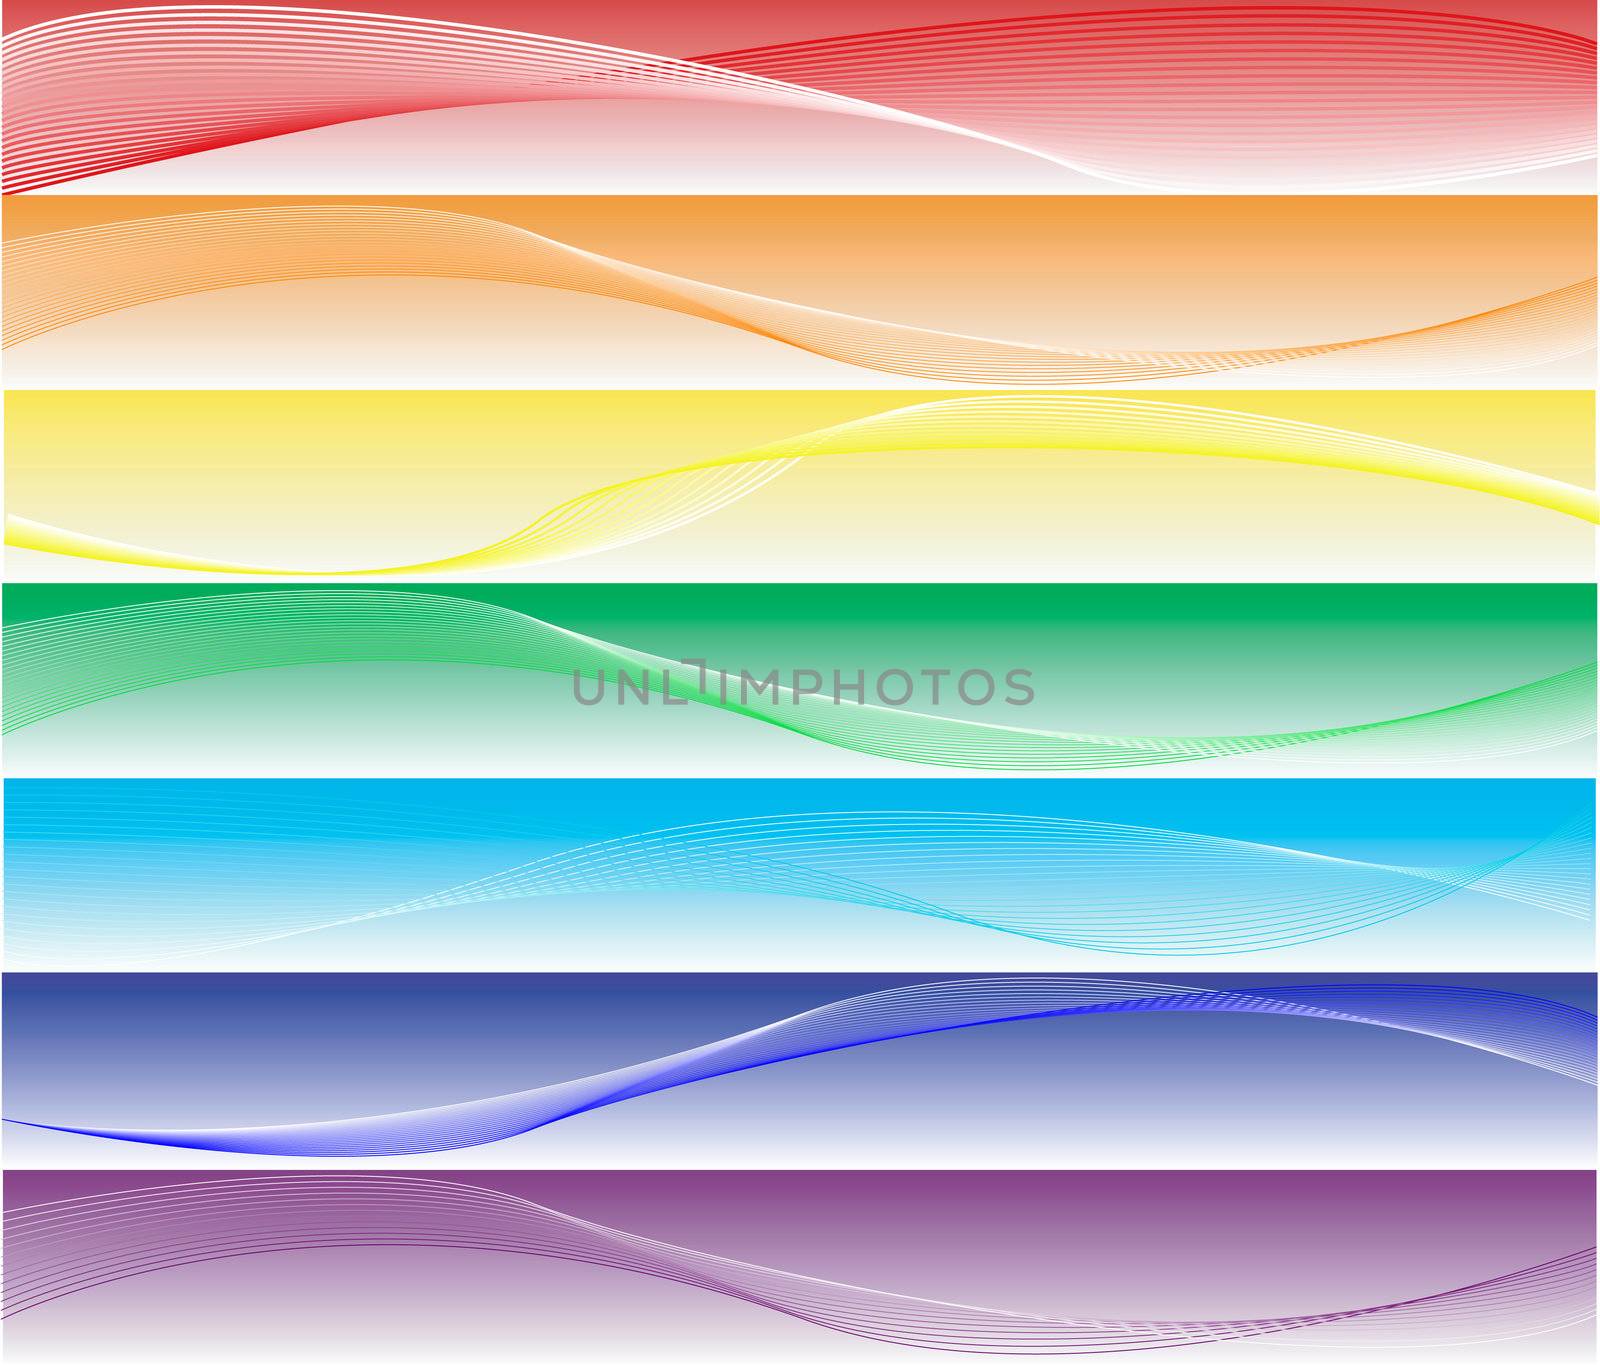 seven different elegant and smooth banners or web site headers in rainbow colors, also suitable as business cards